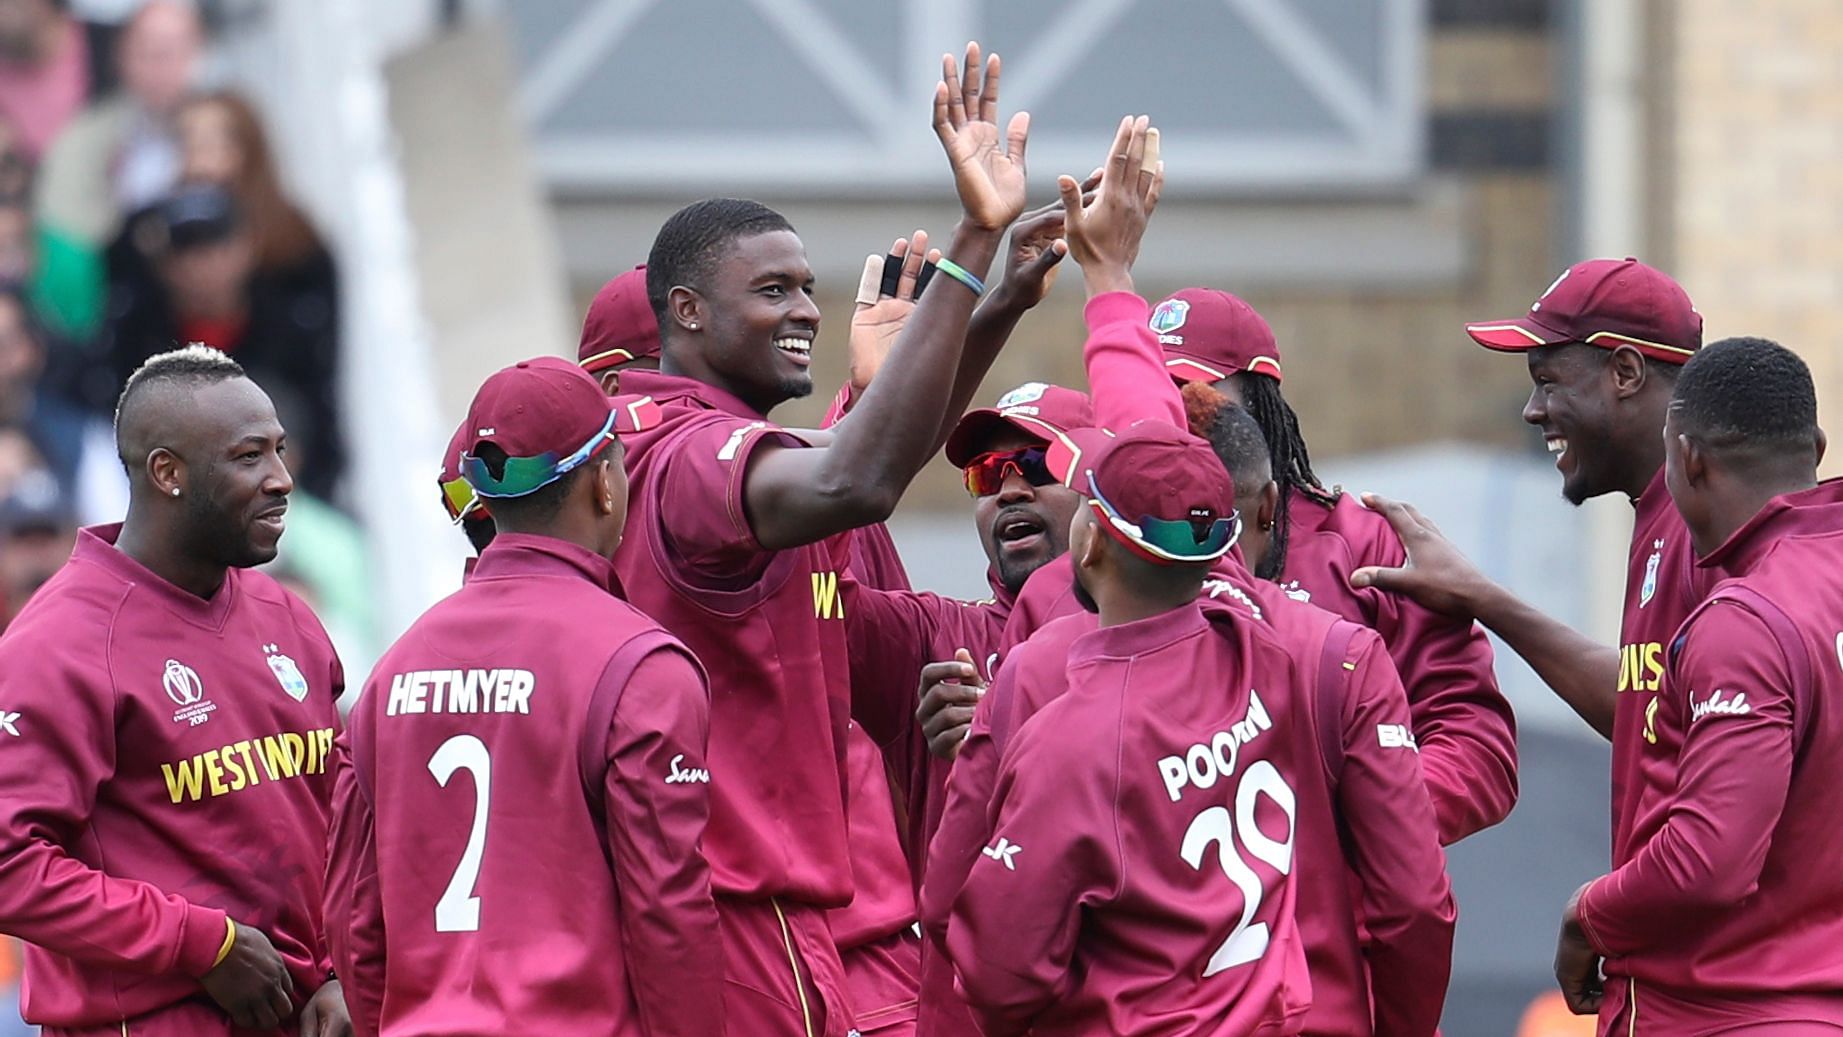 West Indies cricketers celebrate a wicket during their World Cup match against Pakistan.